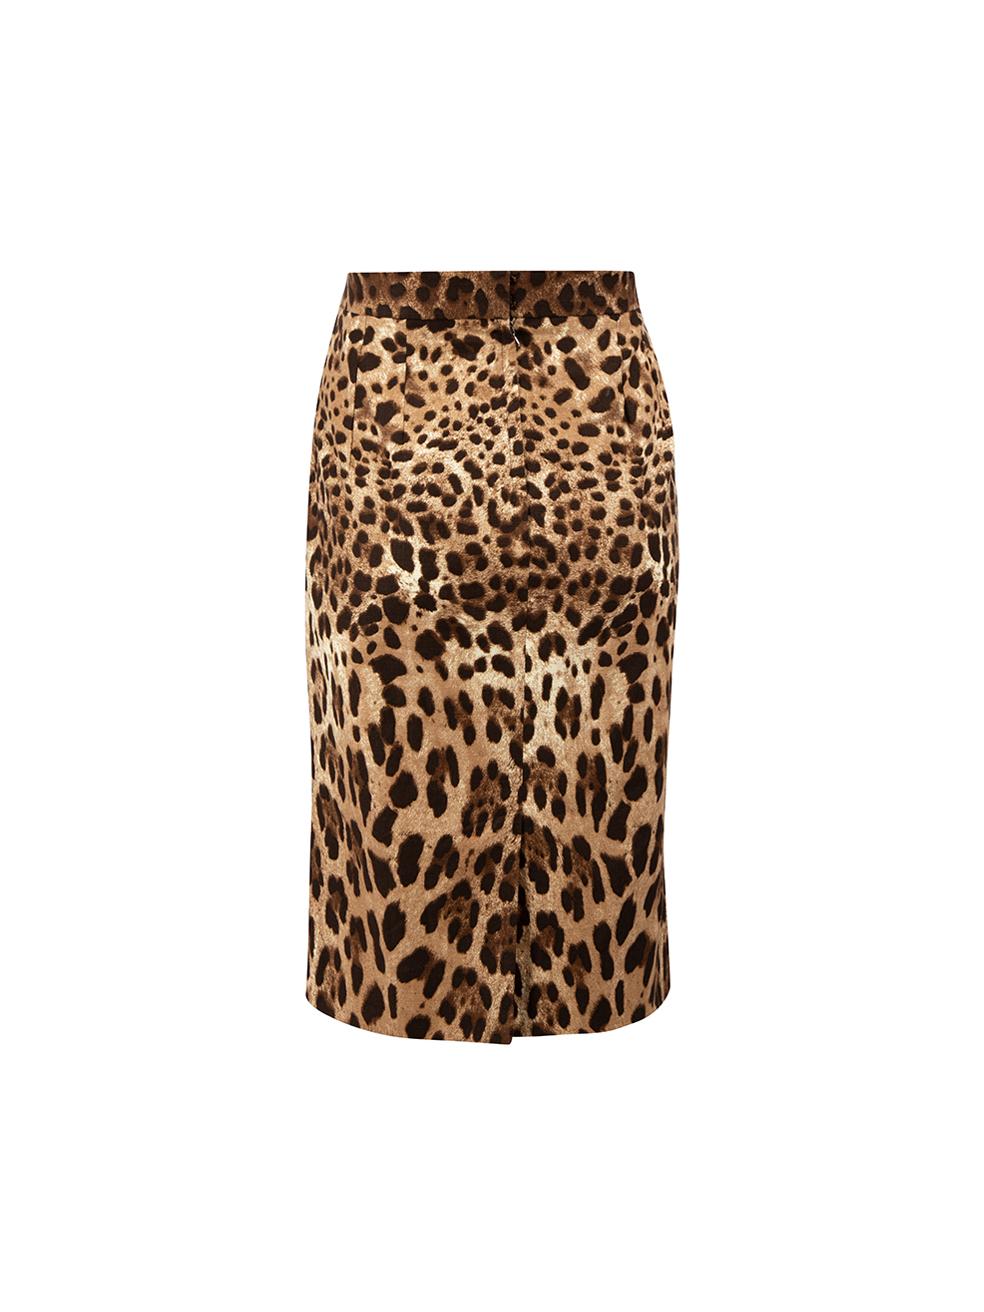 Brown Leopard Print Knee Skirt Size L In Good Condition For Sale In London, GB